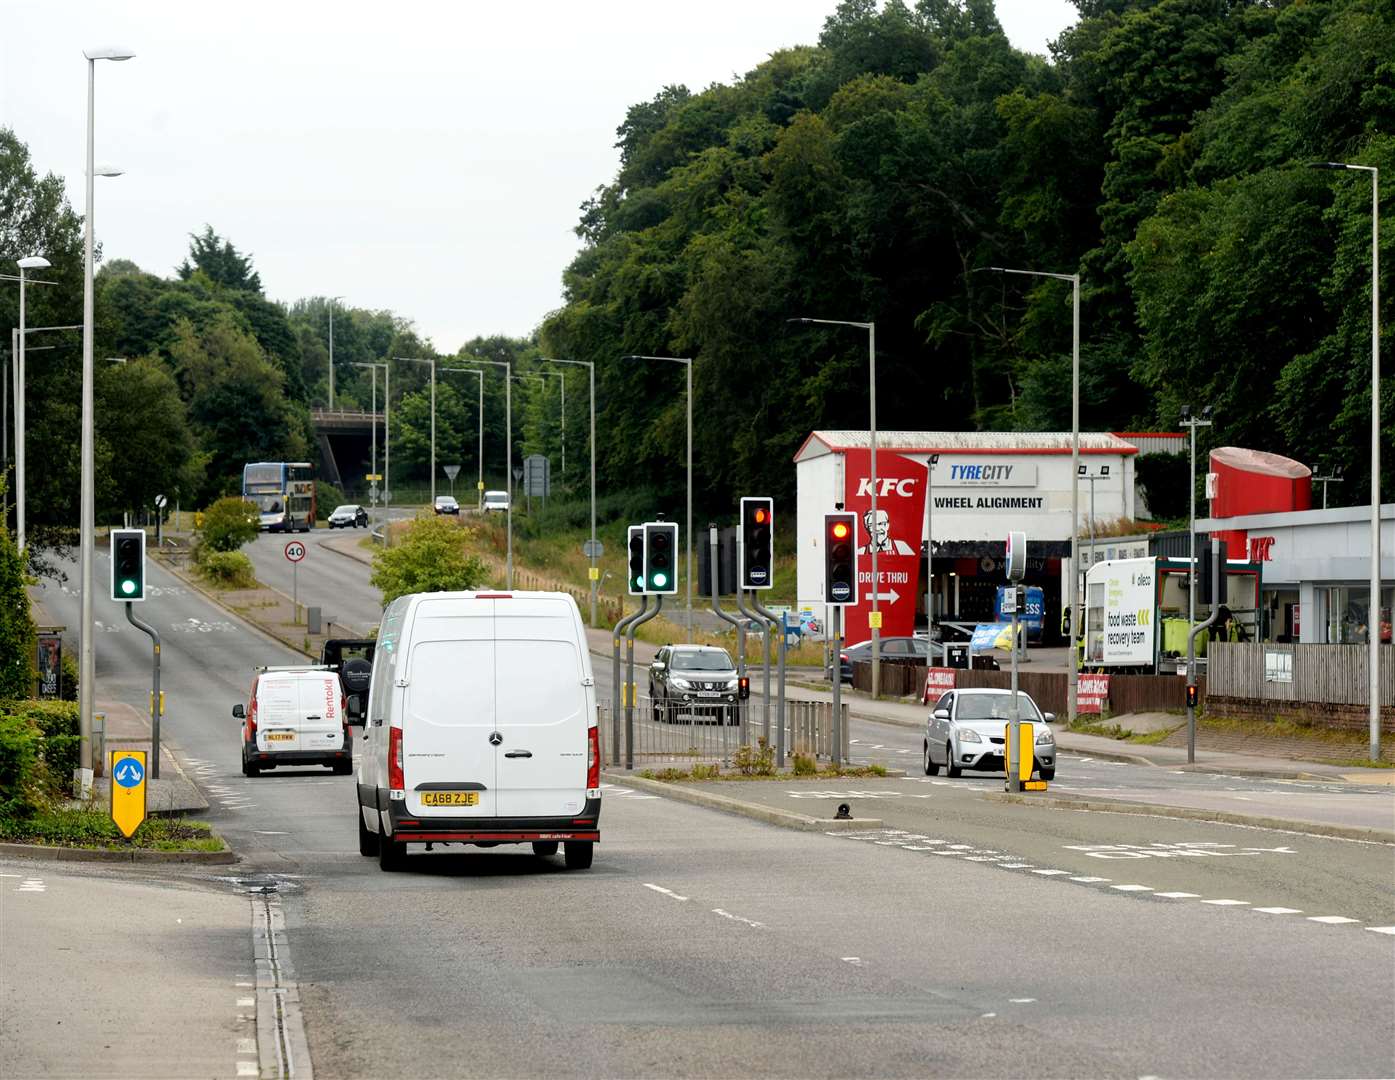 Changes have been made to traffic control measures on Millburn Road.